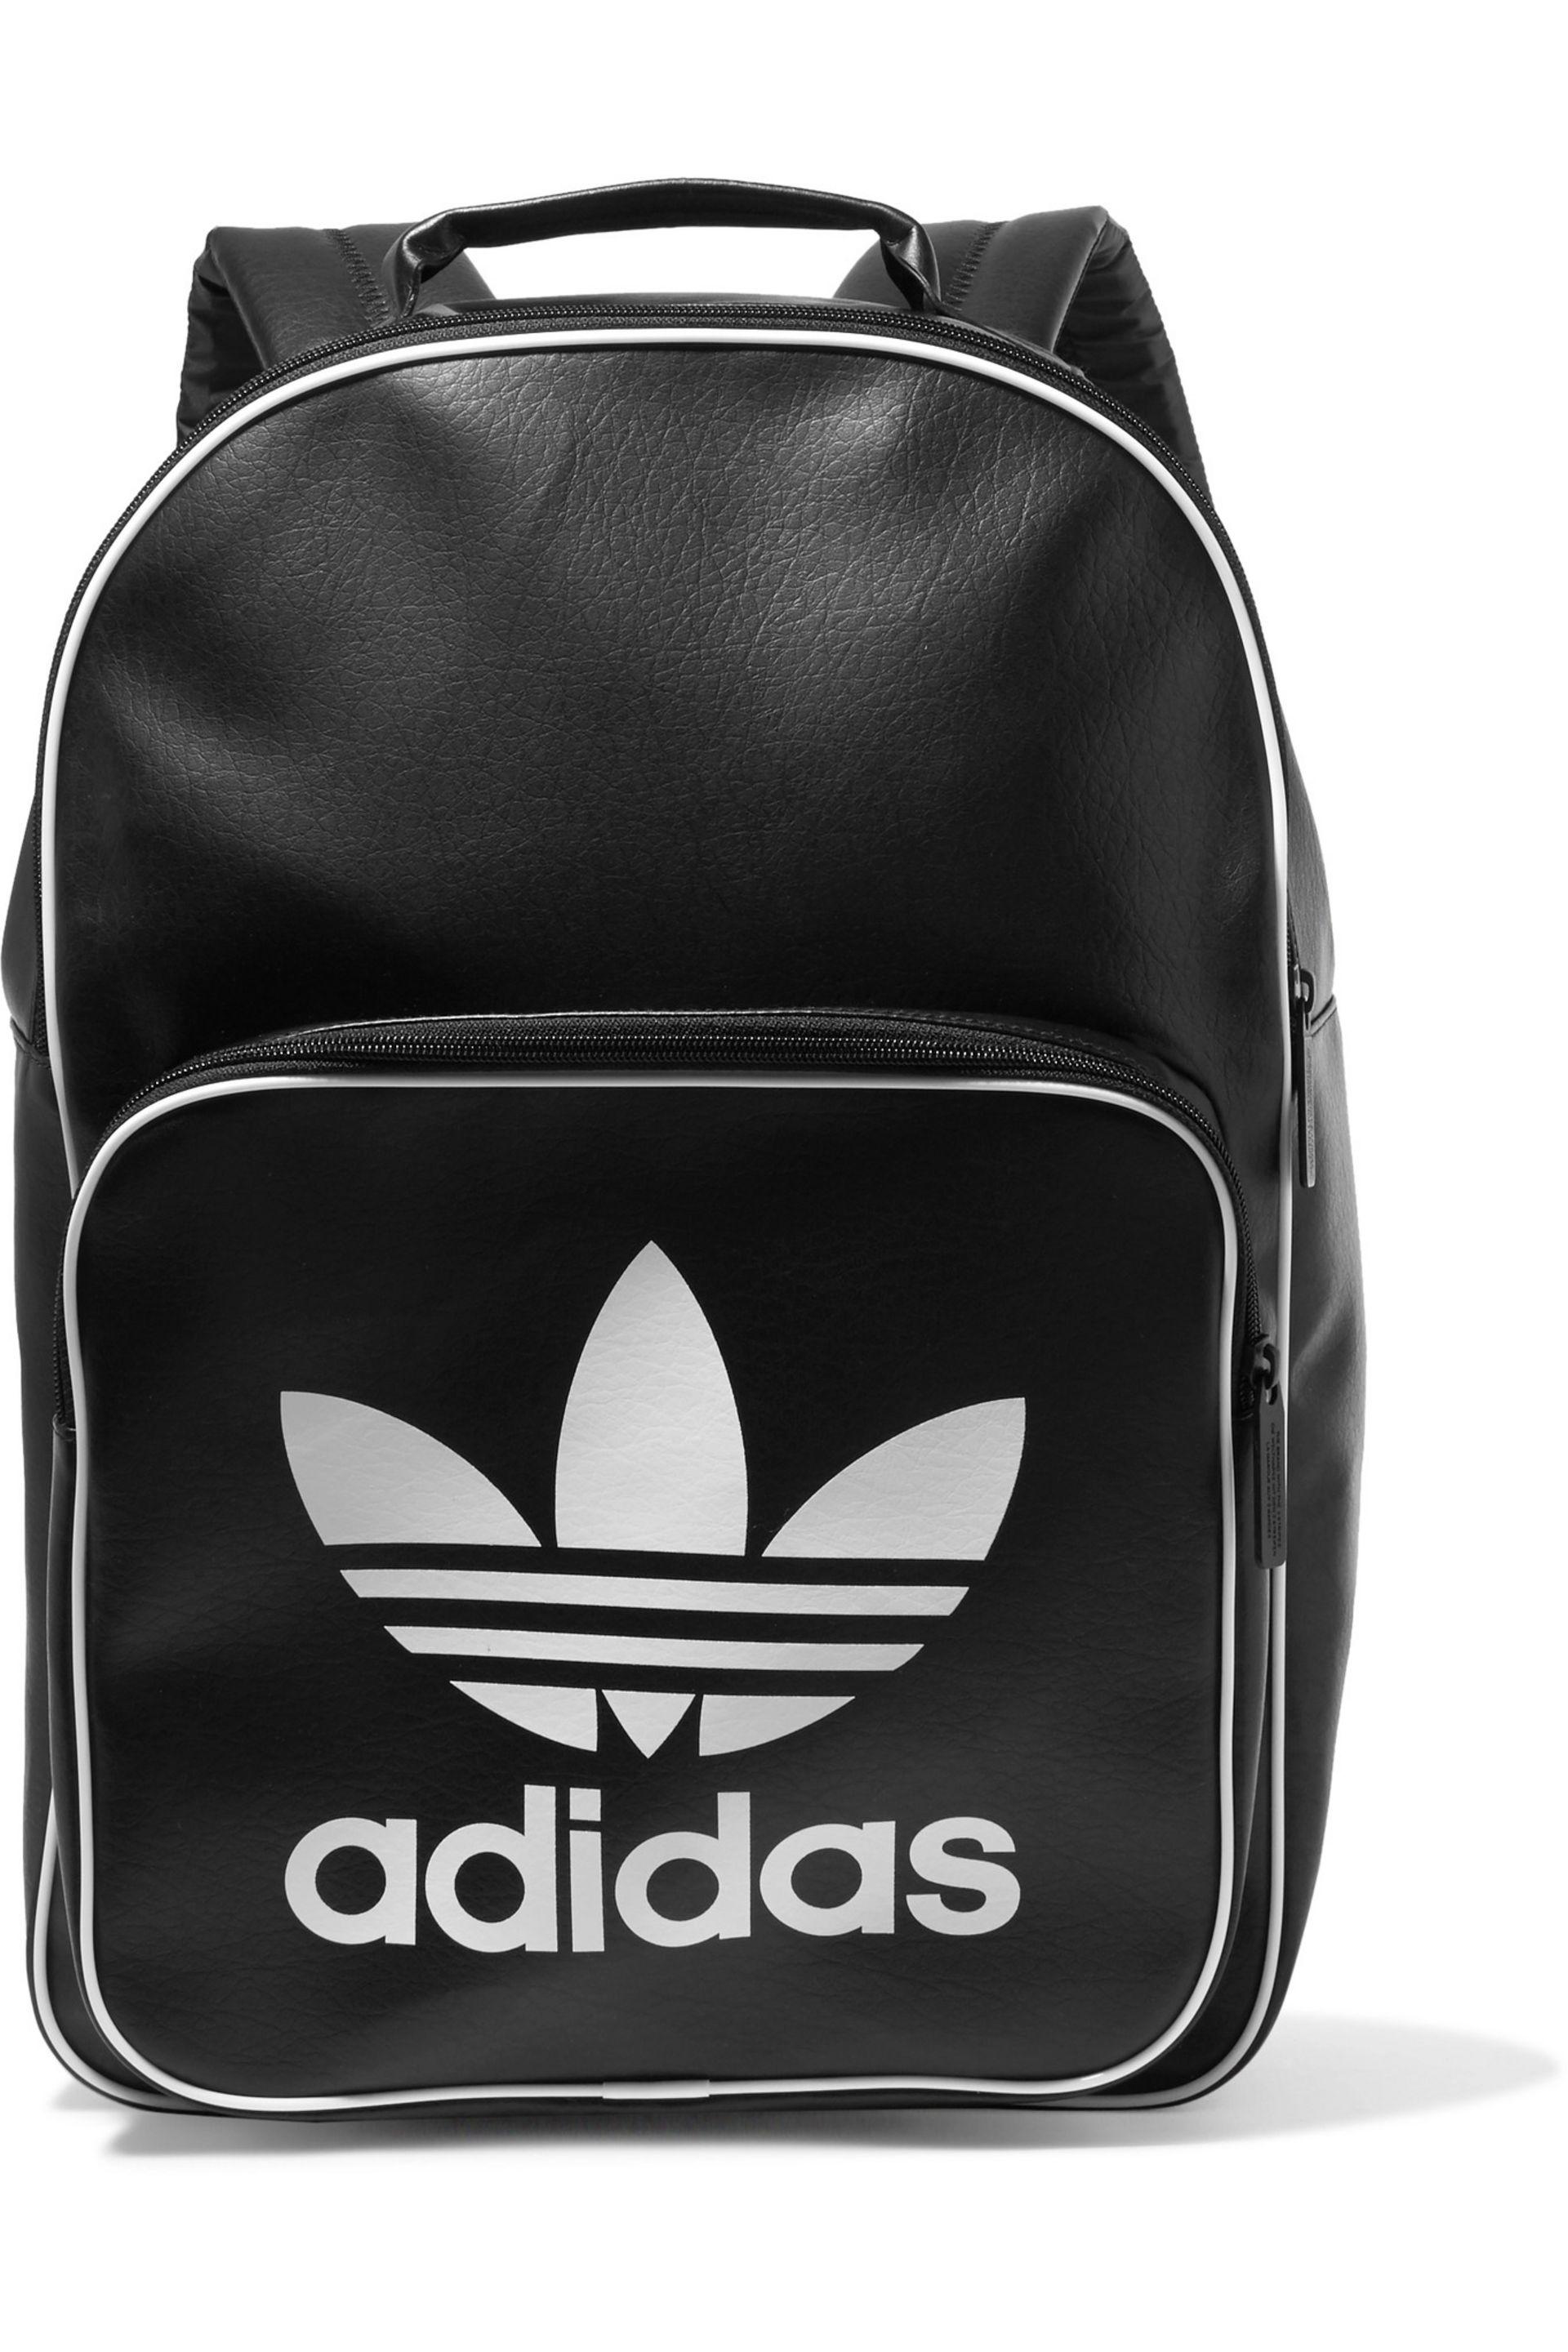 Black Leather Adidas Backpack Austria, SAVE 39% - aveclumiere.com